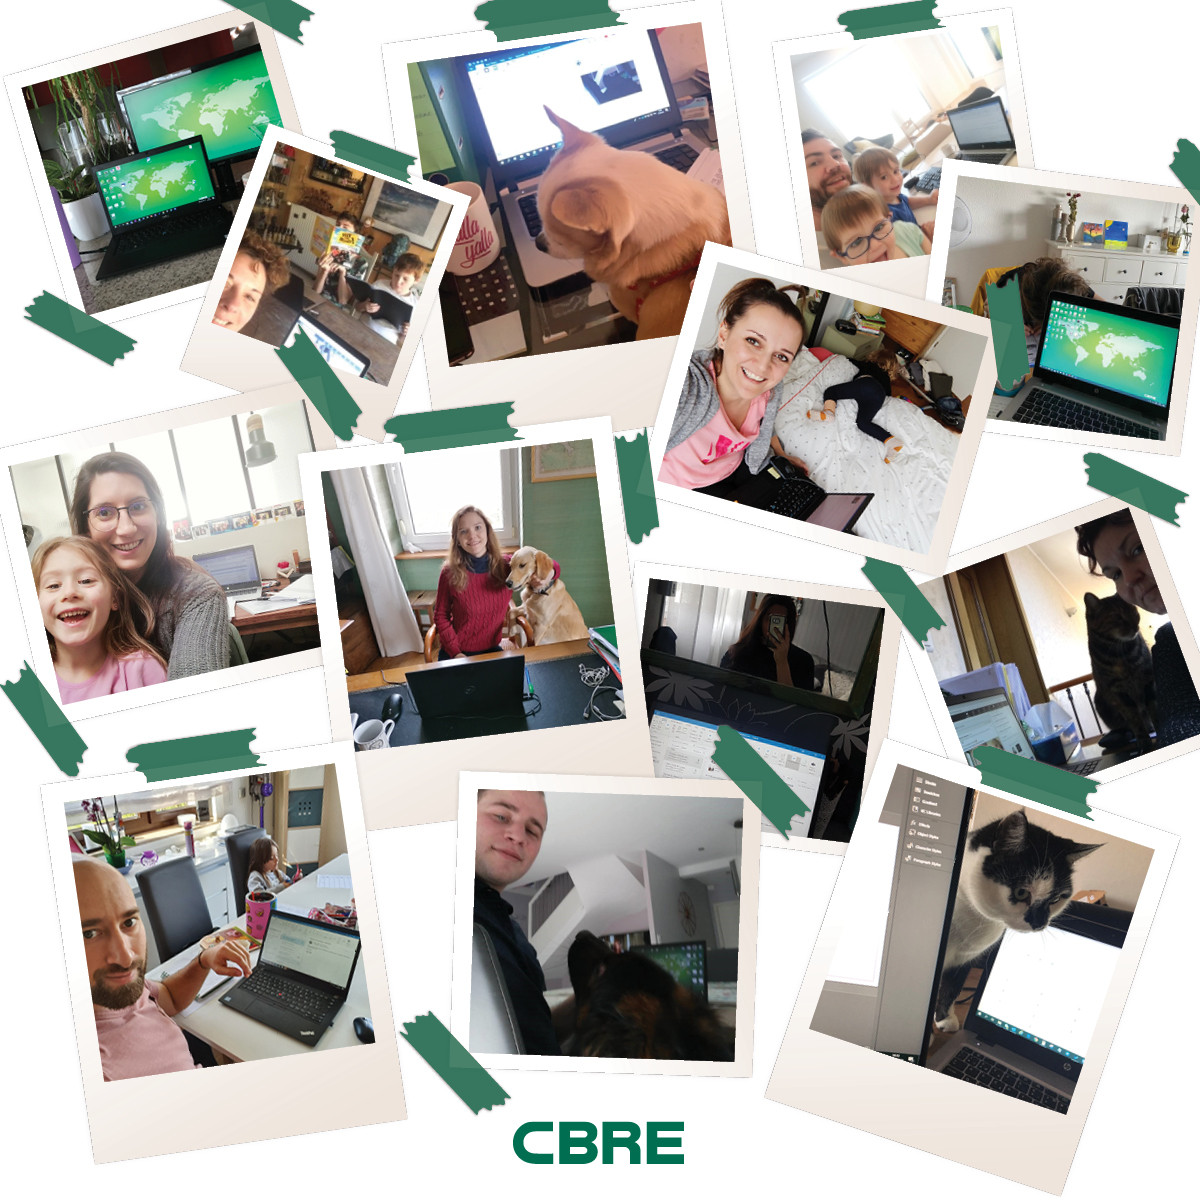 CBRE Luxembourg est aussi en mode #StayHome #StaySafe. (Photo: CBRE Luxembourg)